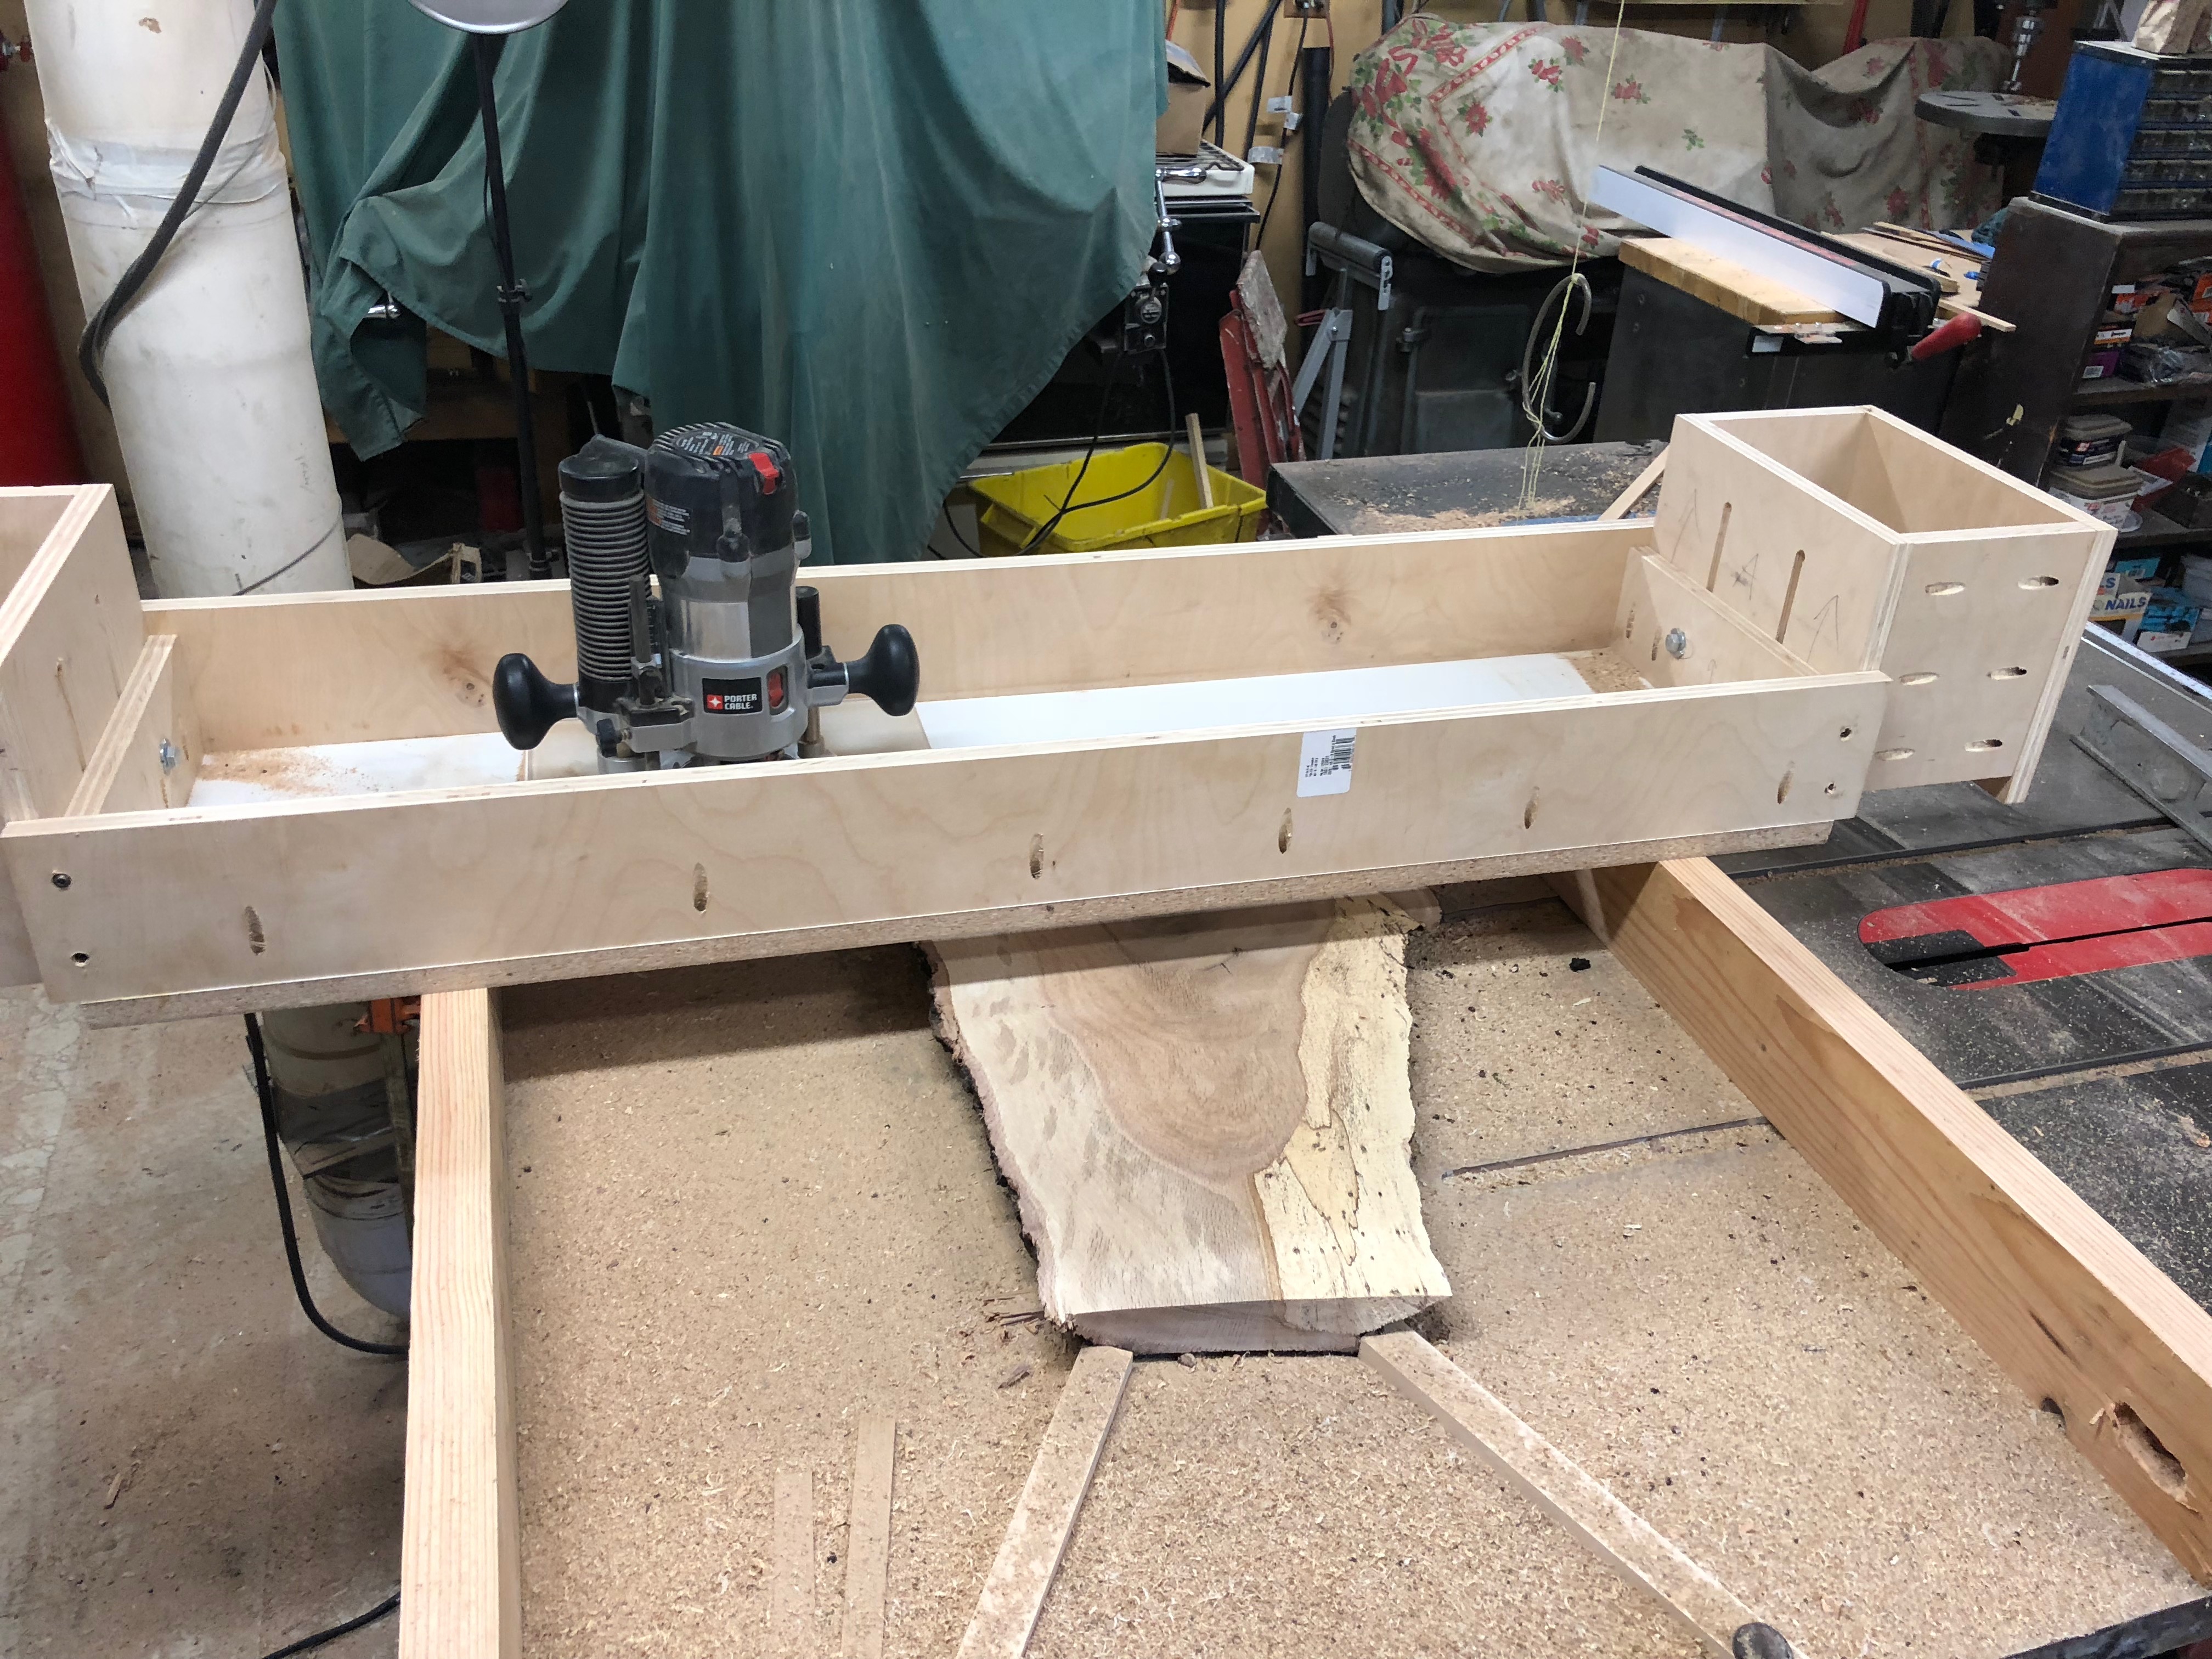 slab leveling router jig / planing sled – corbin's treehouse